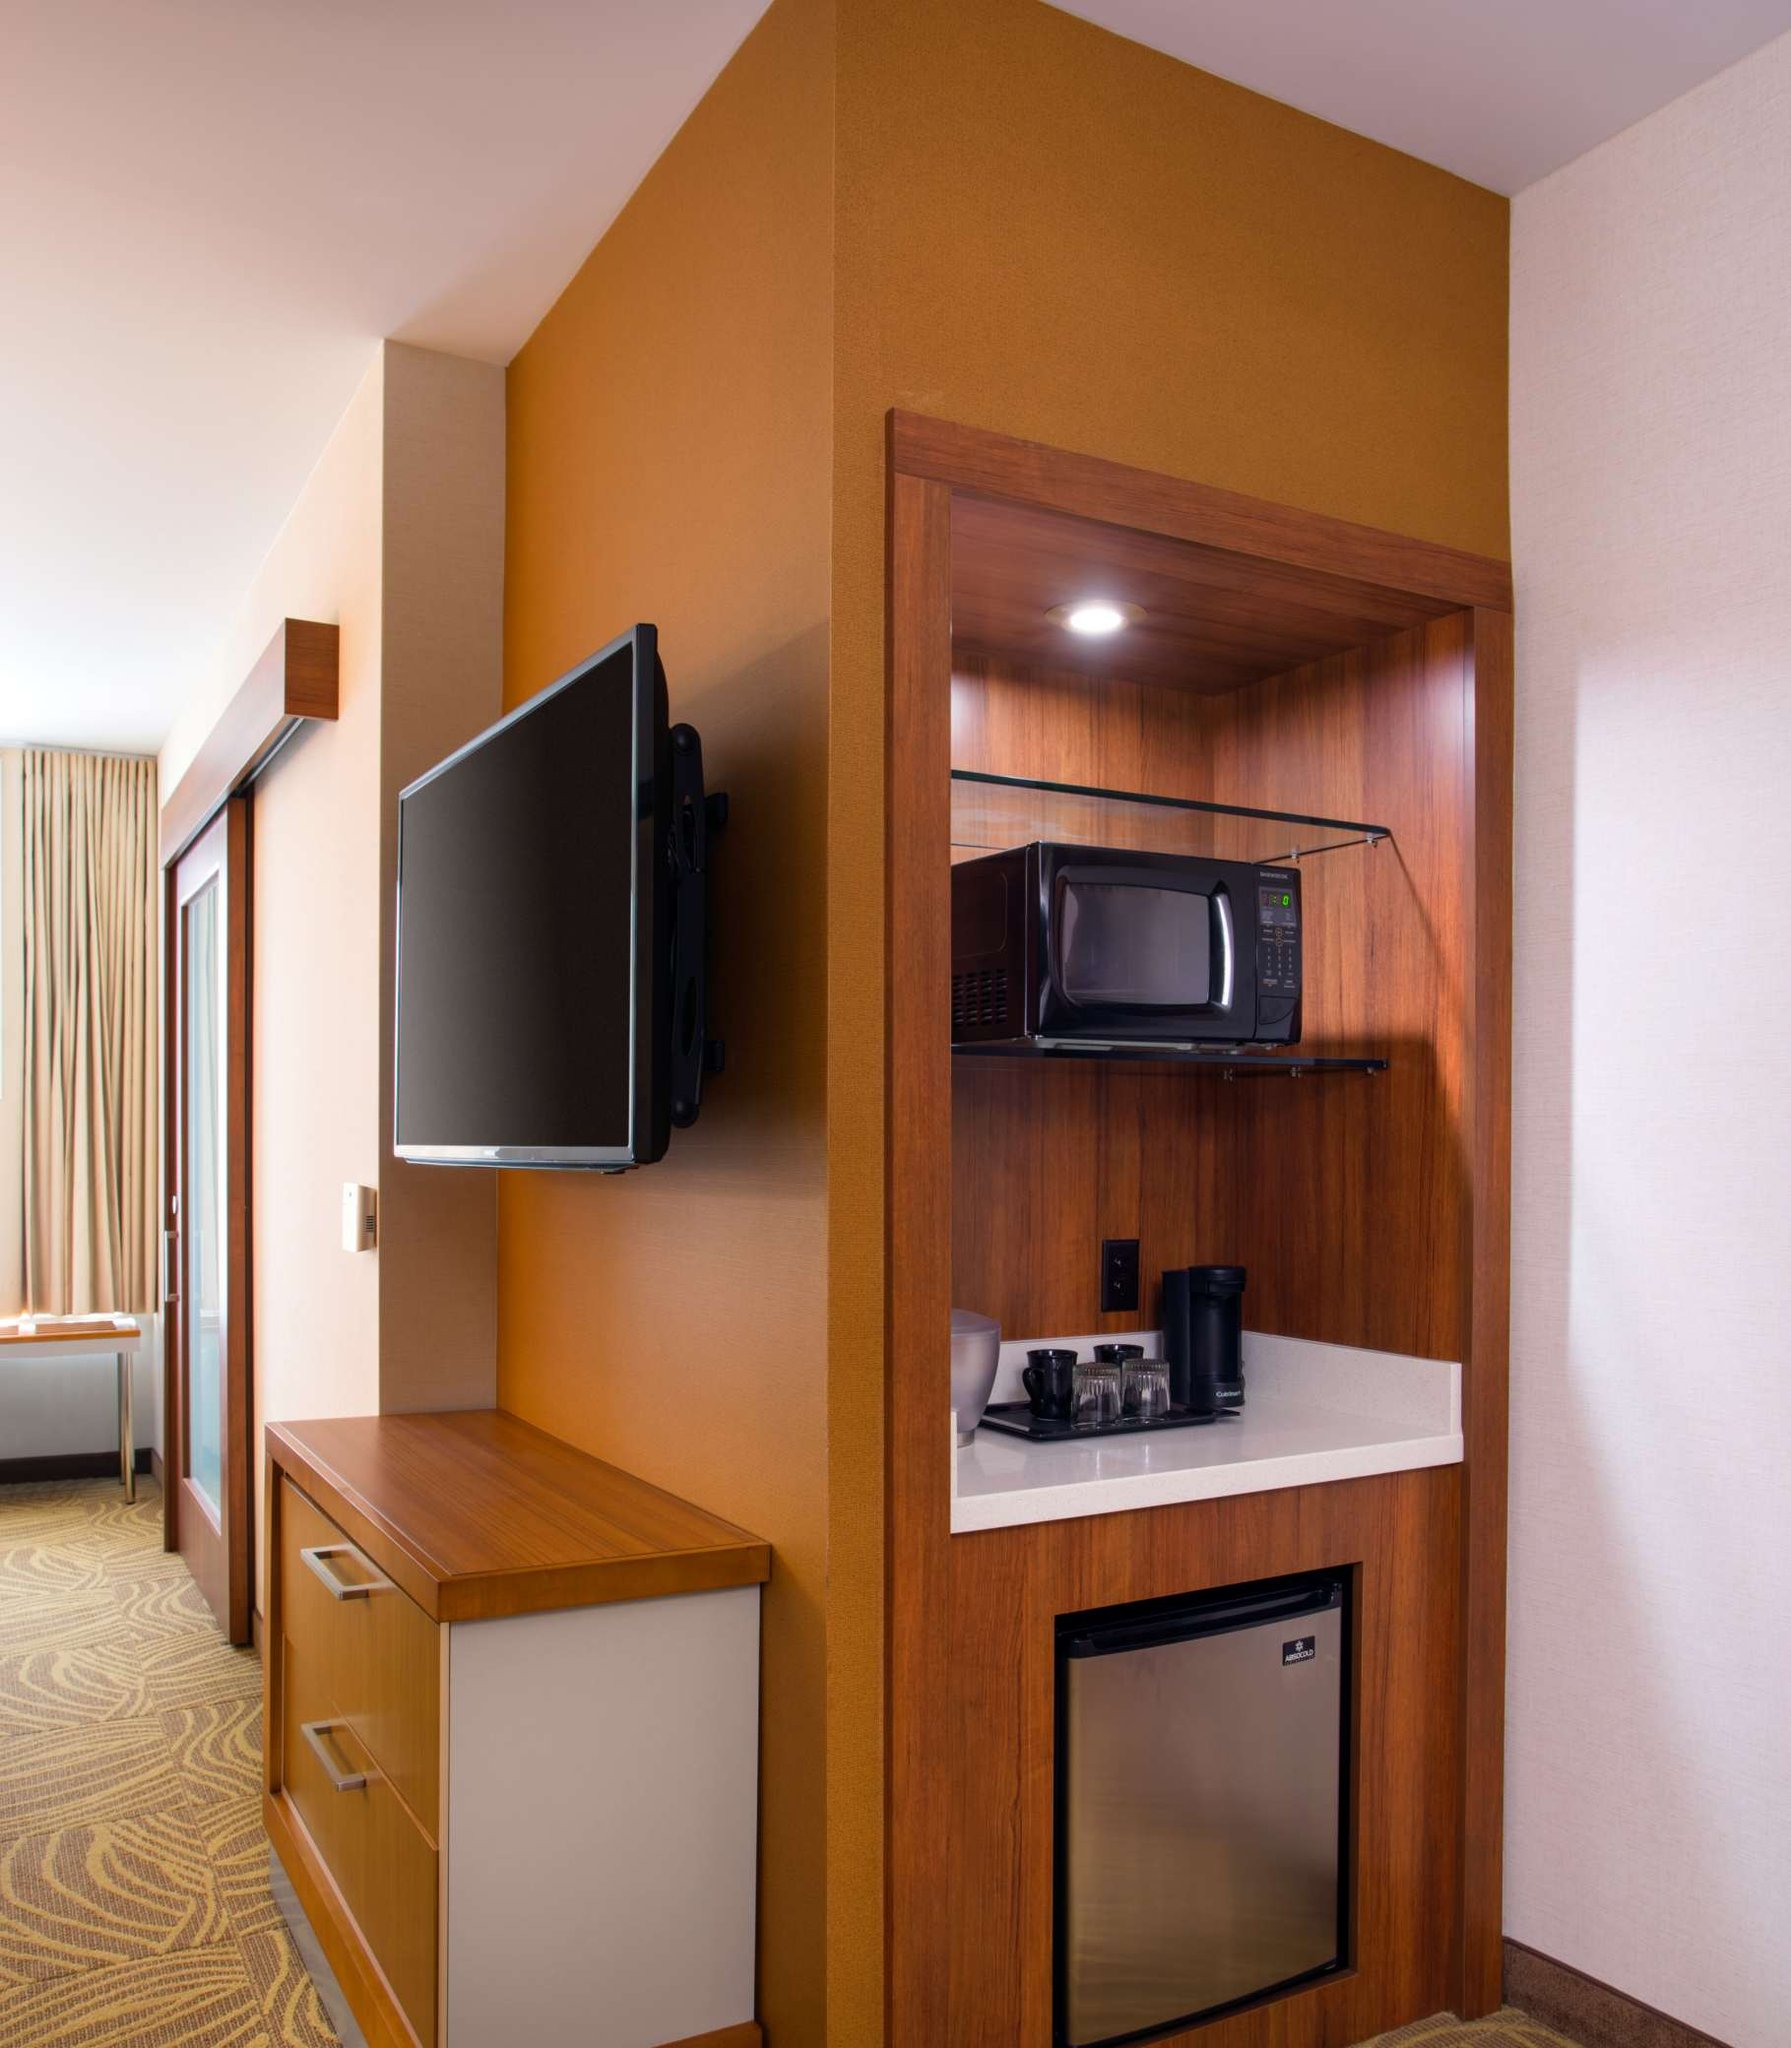 SpringHill Suites Los Angeles Burbank/Downtown